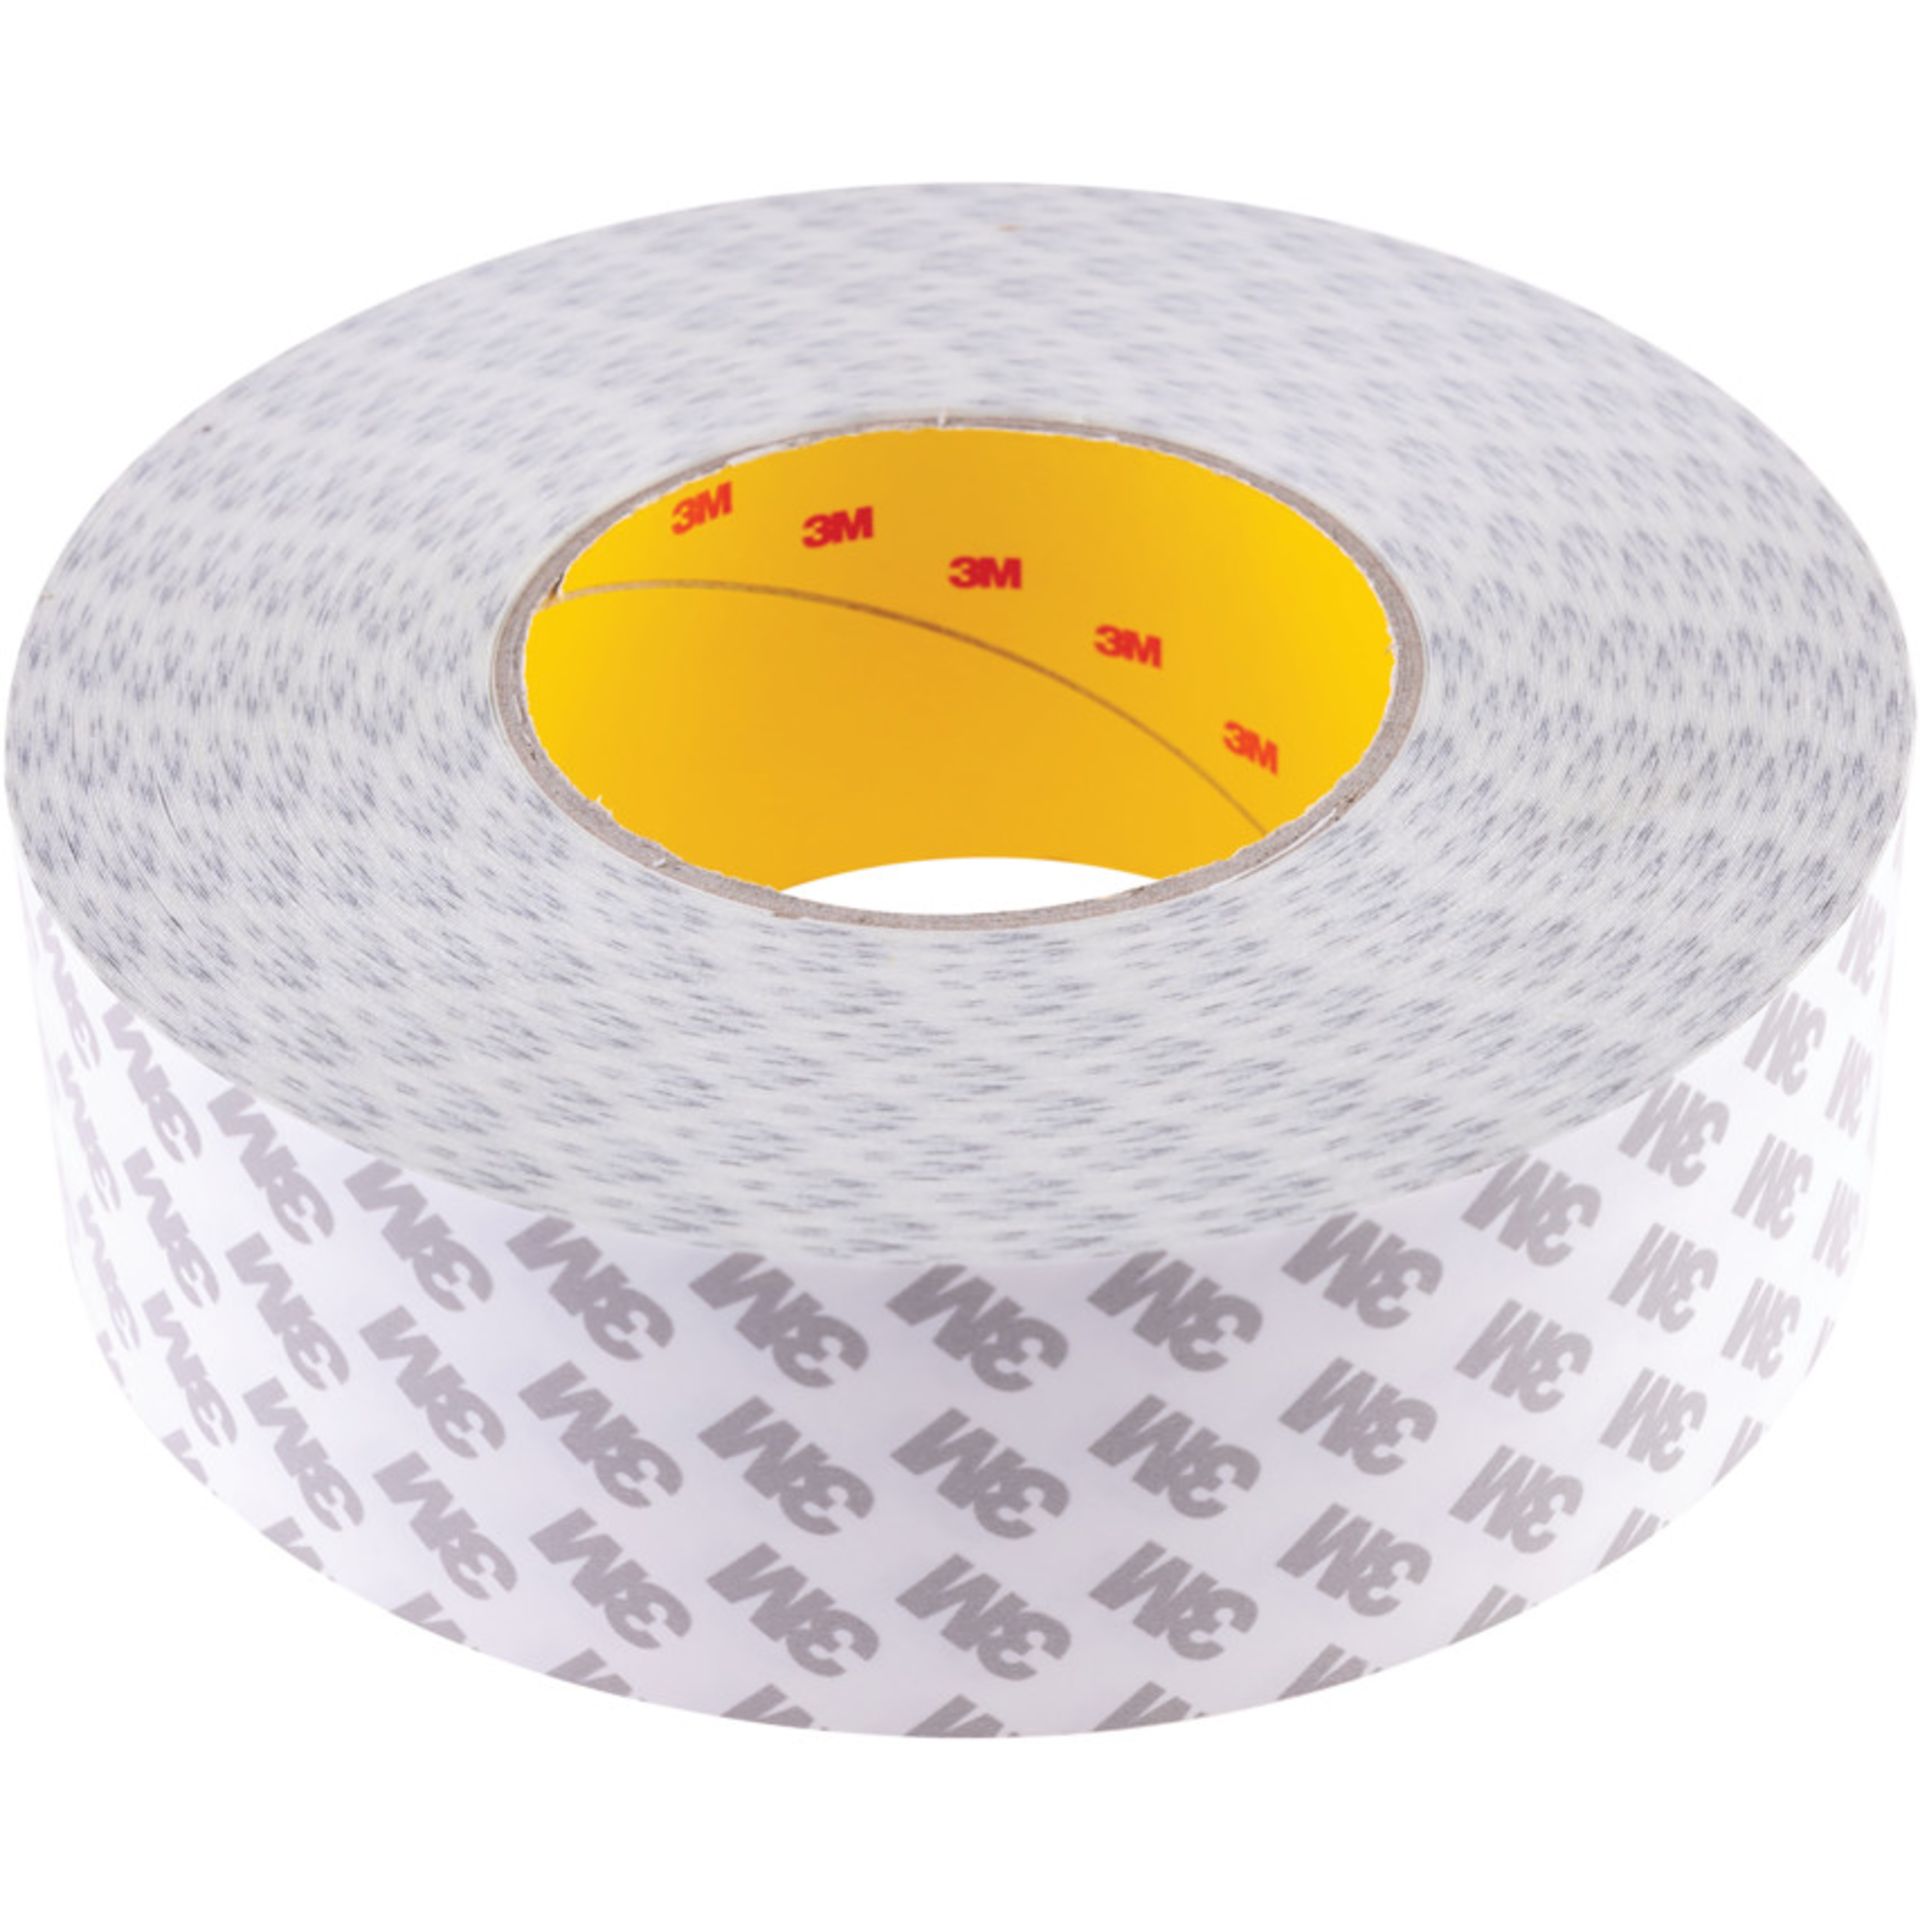 12 Rolls of 25mm 3M 9080 Double Sided Tape Non Woven High Bond RRP£200+ - Image 2 of 3